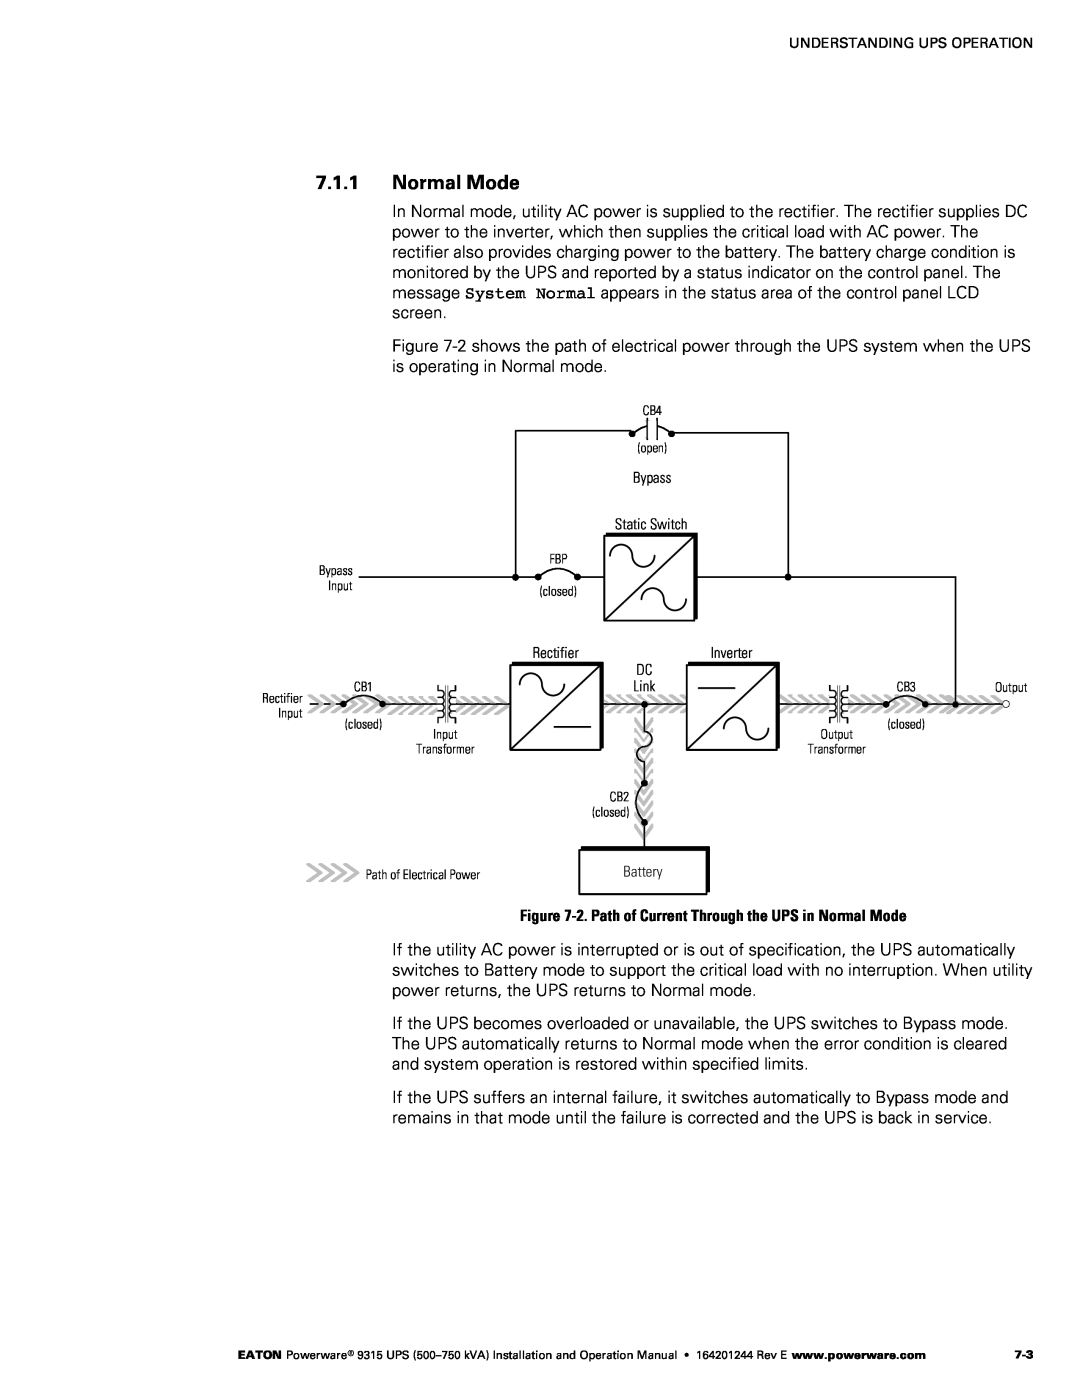 Powerware Powerware 9315 operation manual ‐2. Path of Current Through the UPS in Normal Mode 